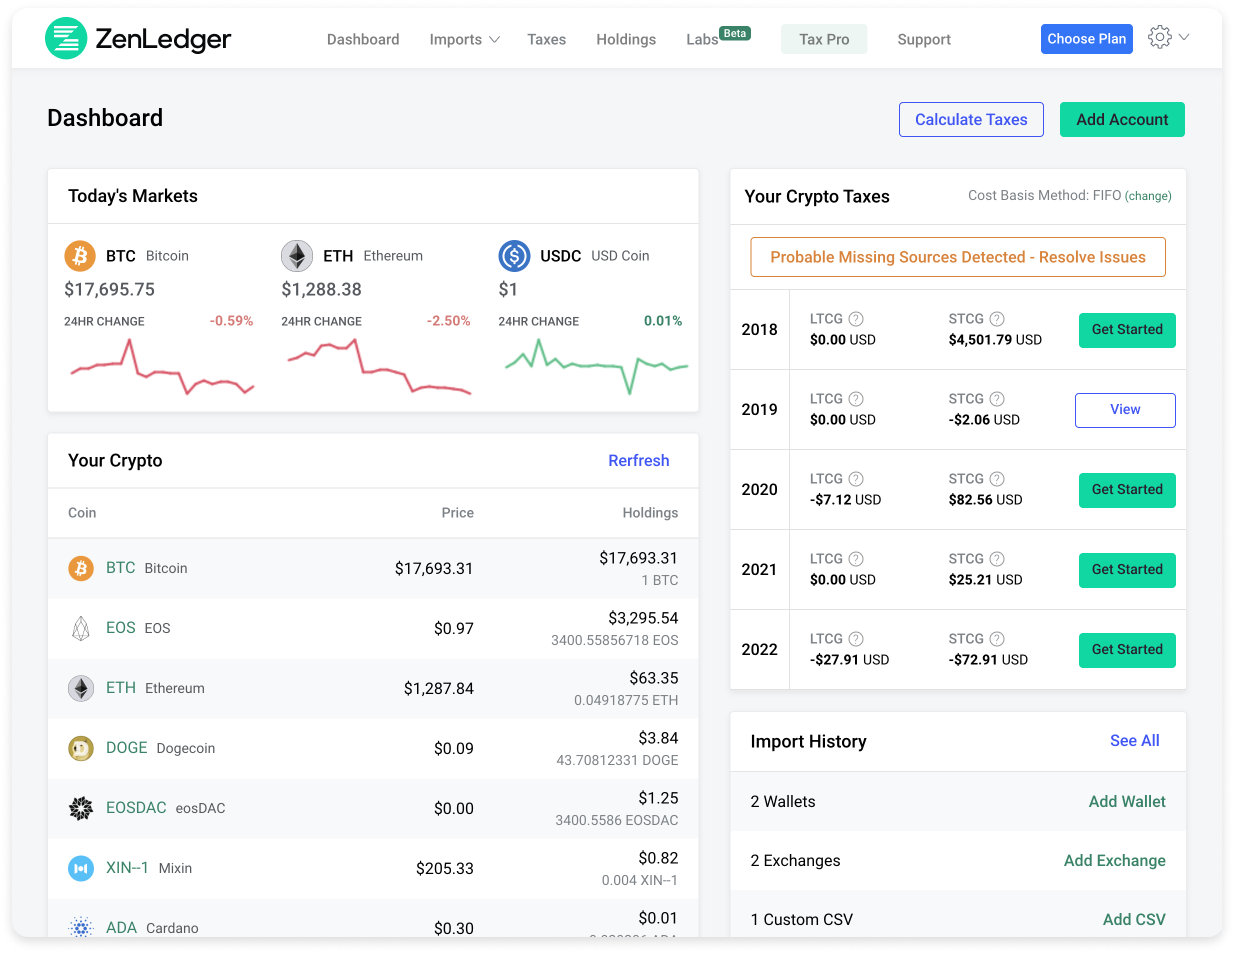 Image of ZenLedger’s dashboard with sample data